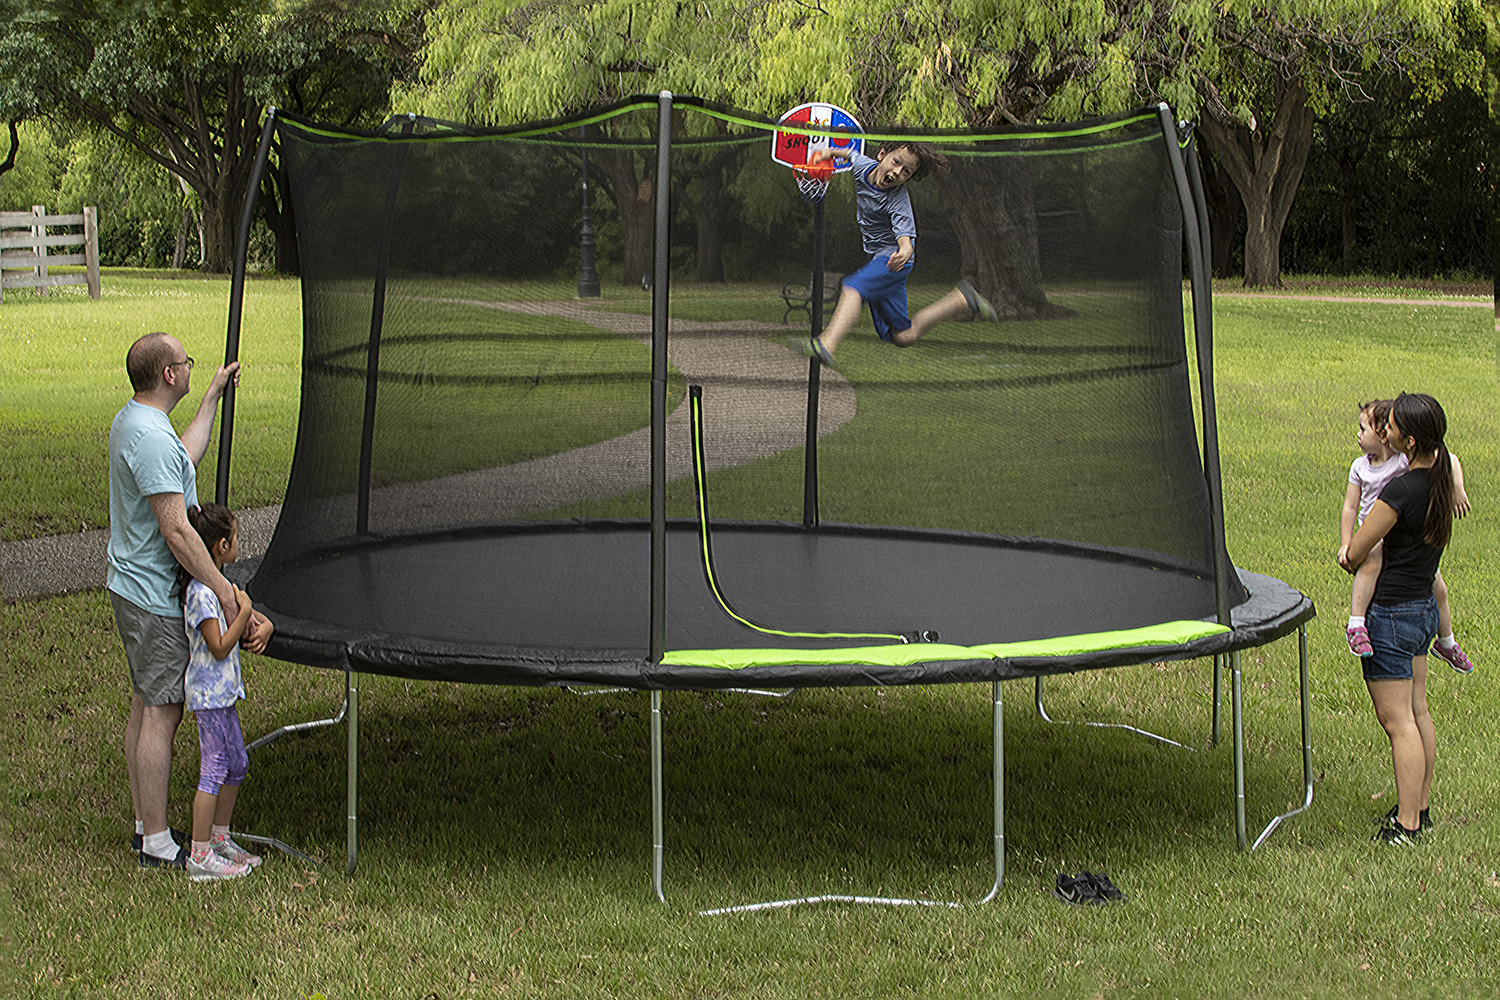 Jump King 14ft Trampoline With Basketball Hoop, Safety Enclosure, Green - image 2 of 10